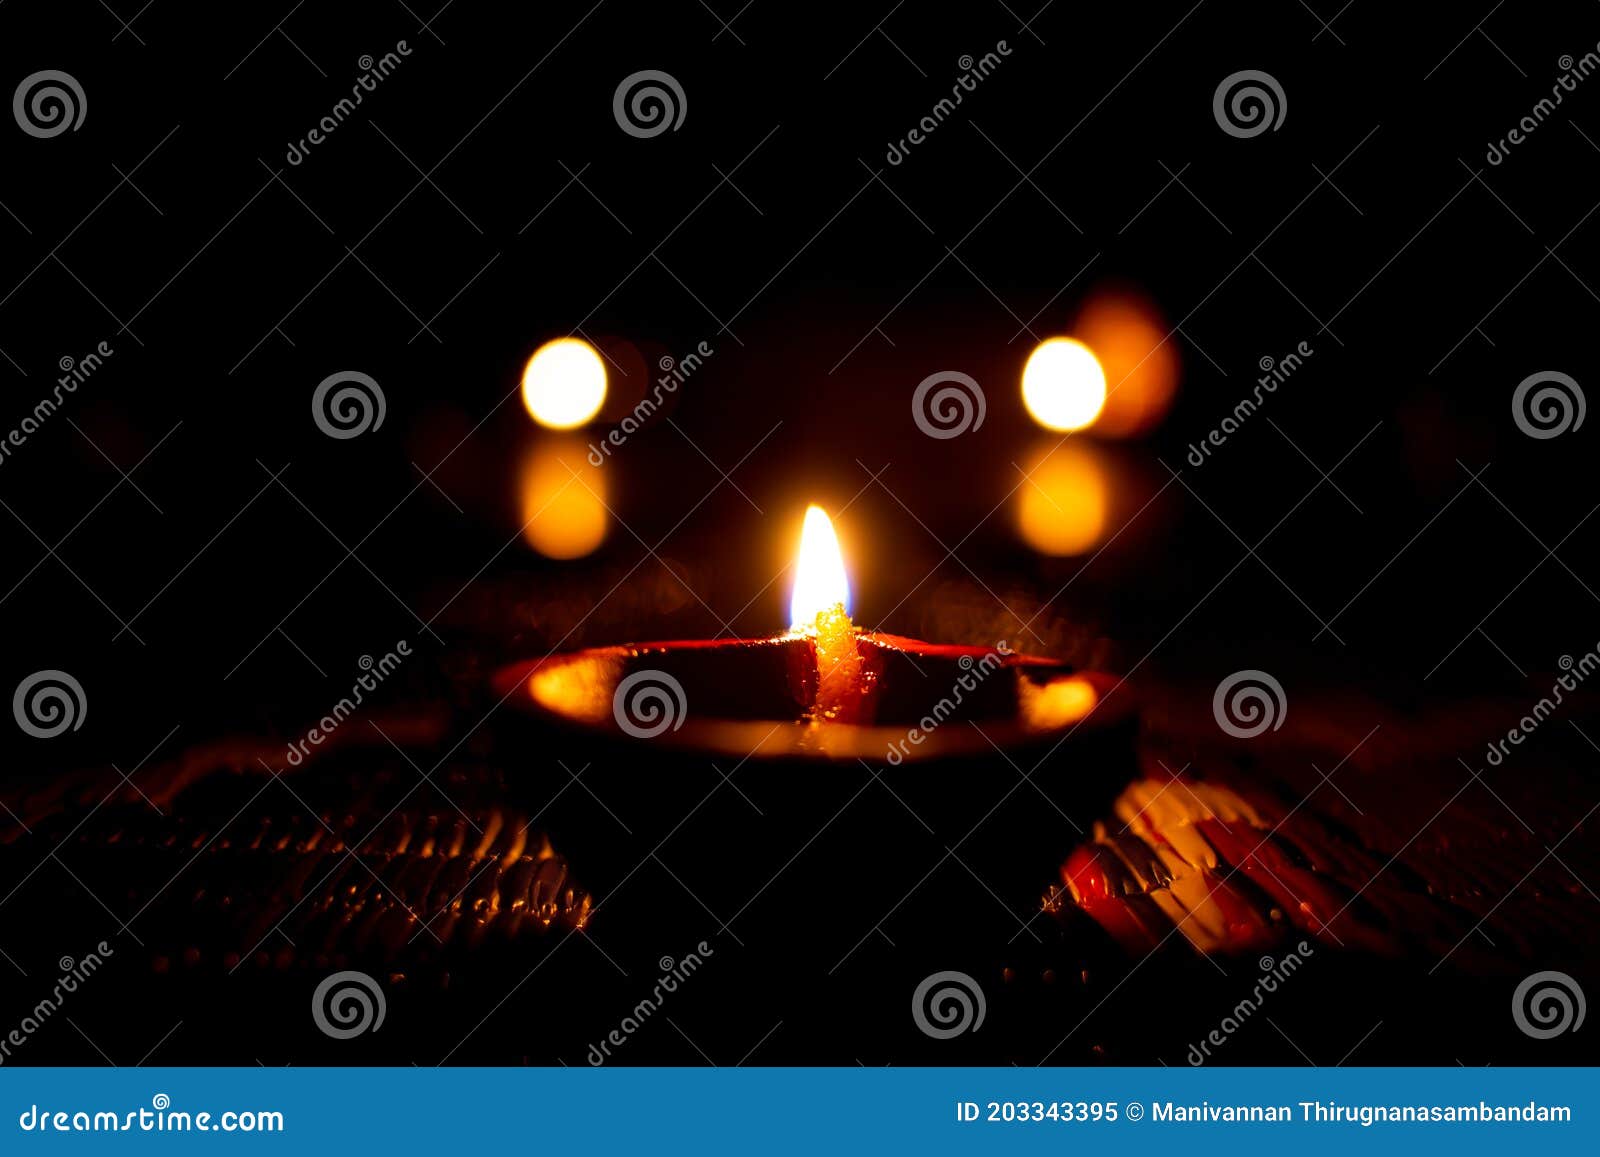 Lighting of Diya Commonly Done during the Indian Festivals ...